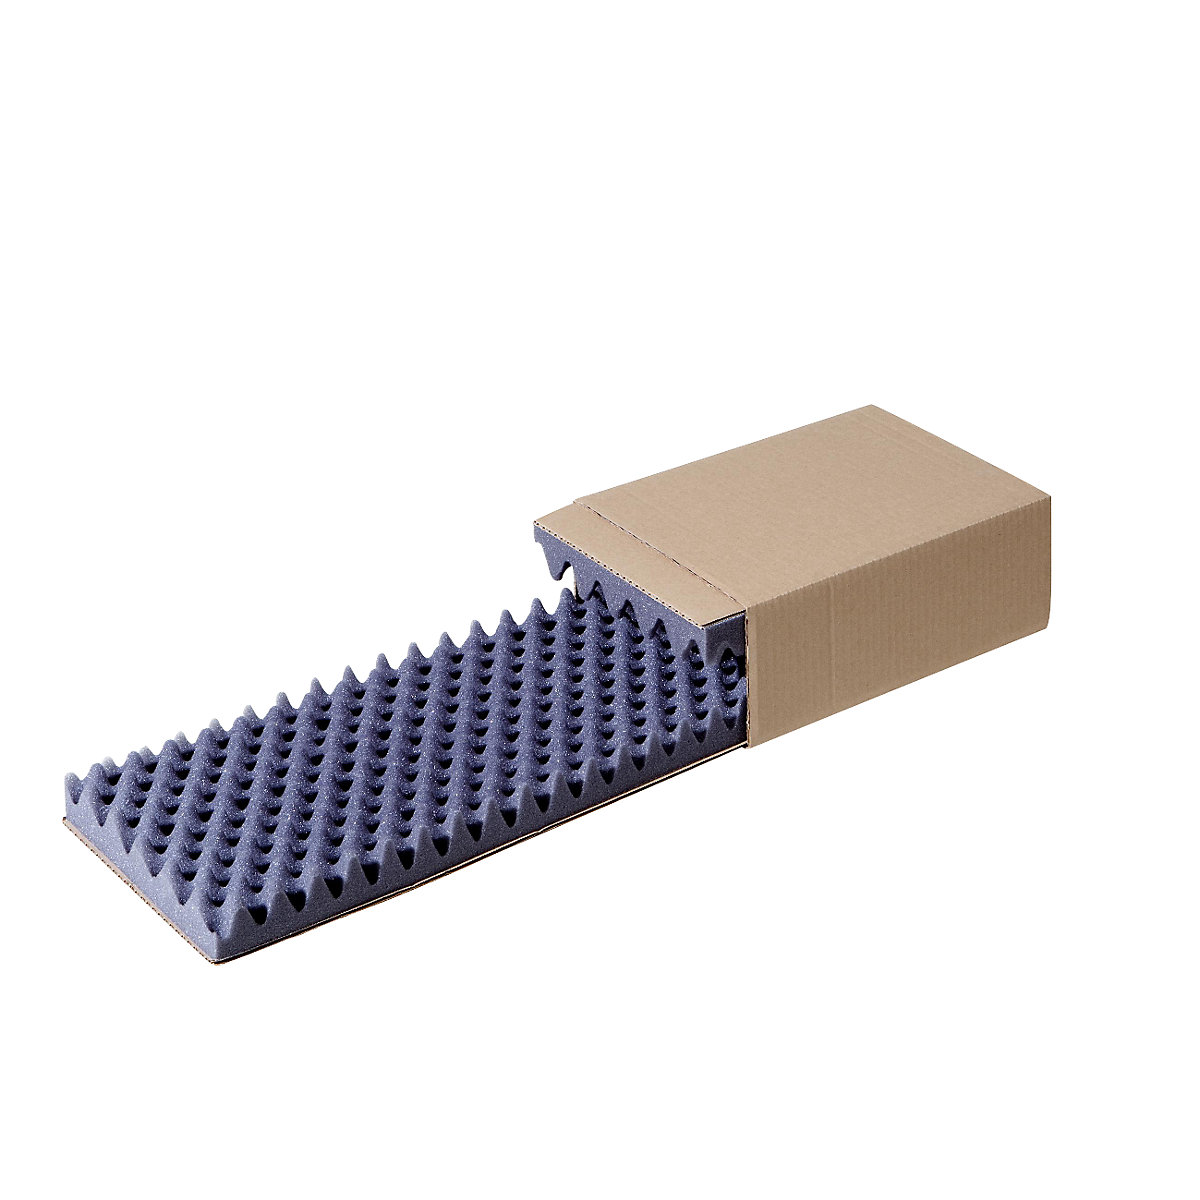 Slide boxes, internal part FEFCO 0907, external part FEFCO 0503, padded, internal dimensions 300 x 200 x 100 mm, pack of 50